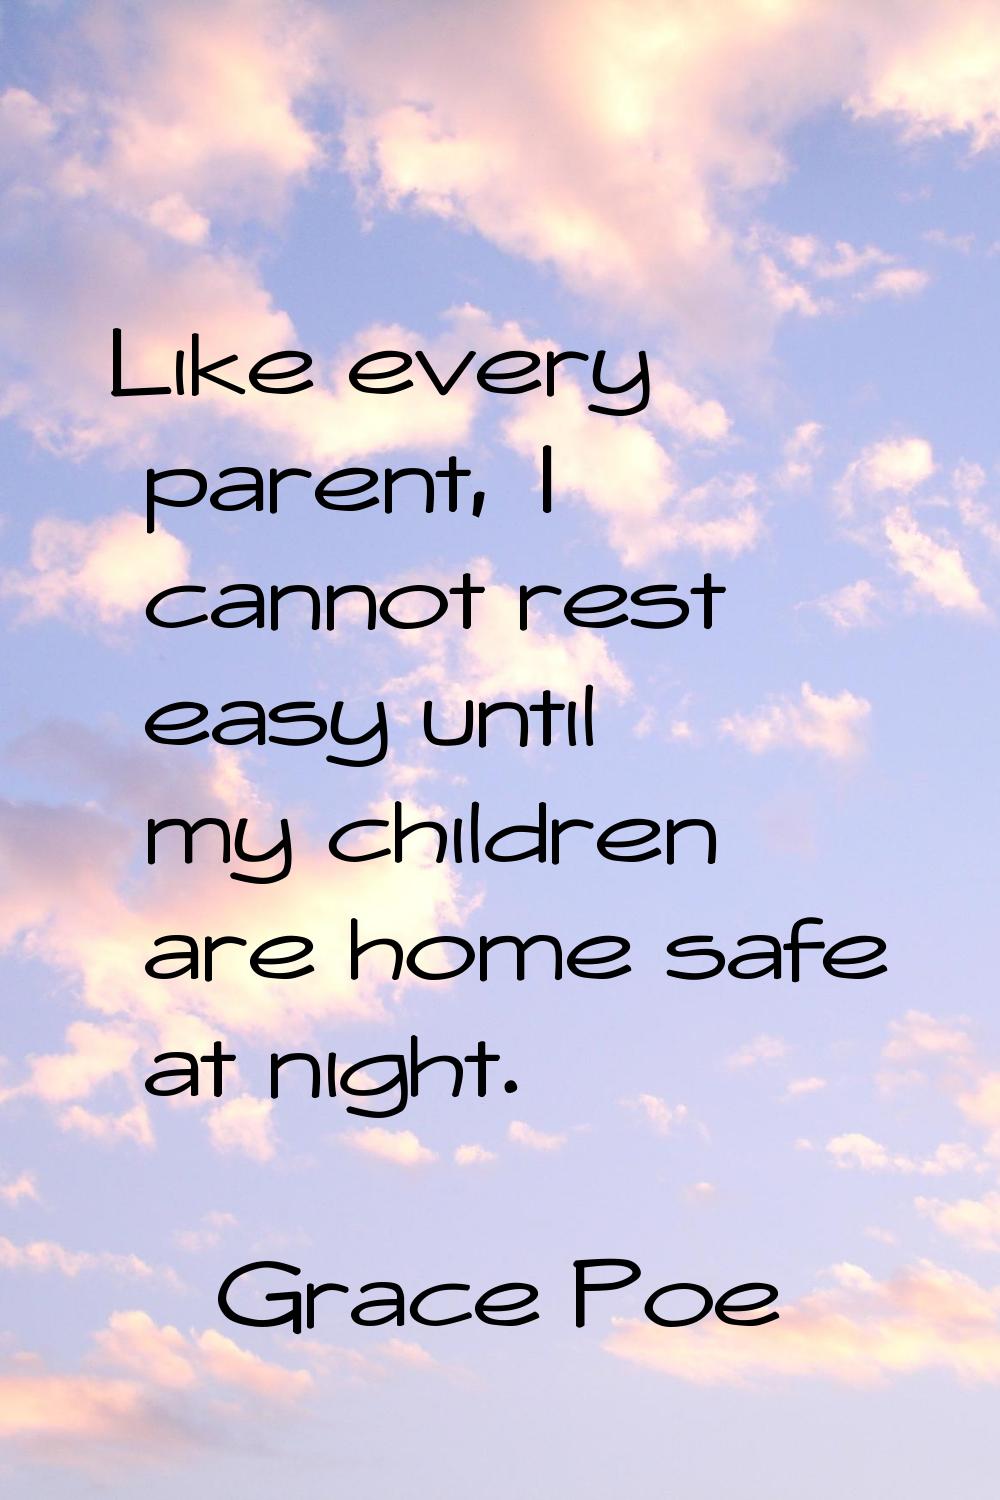 Like every parent, I cannot rest easy until my children are home safe at night.